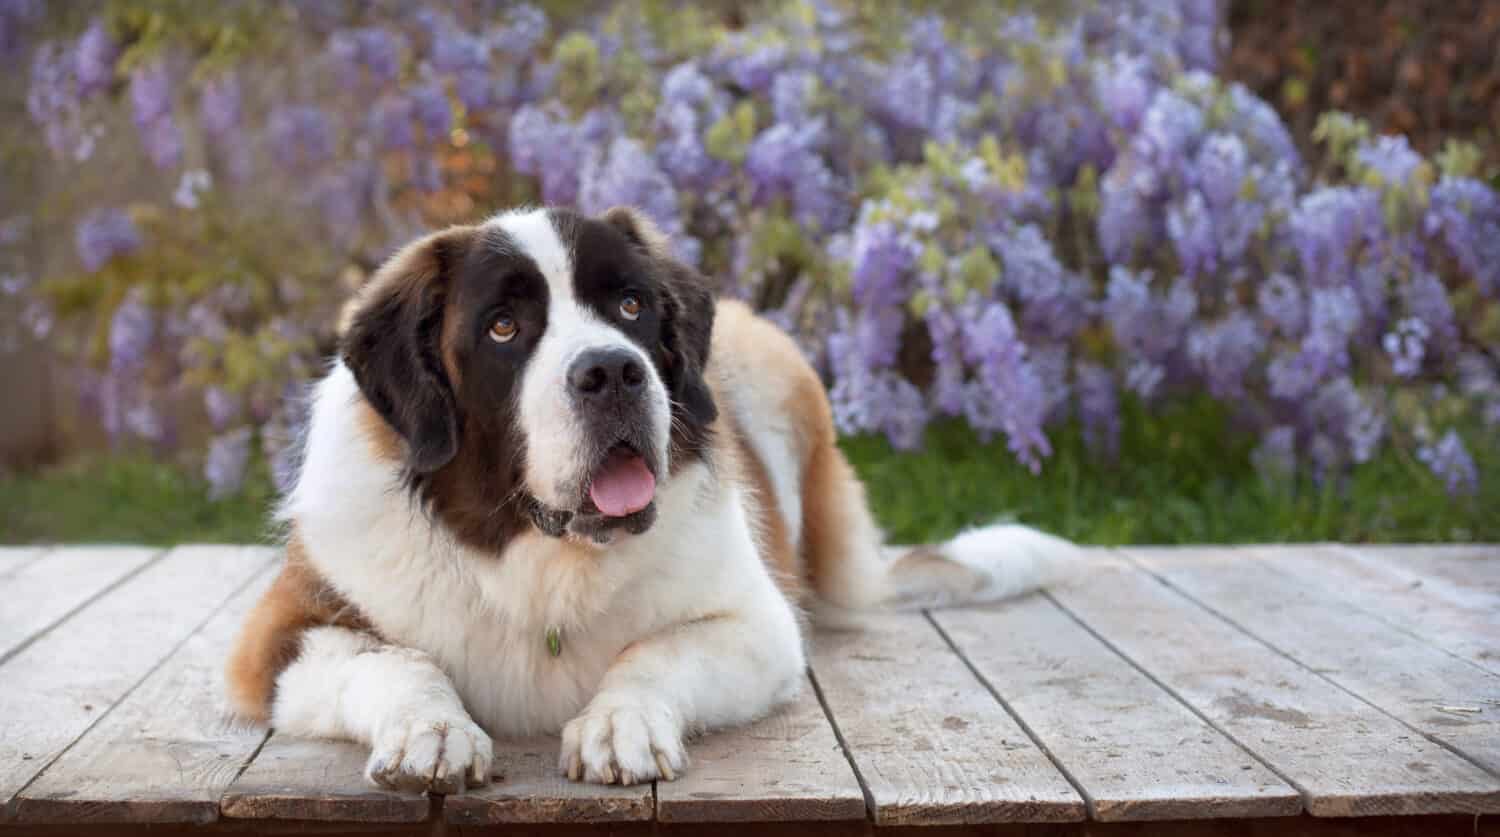 Very large dog sits and looks up on wooden plank in front of wisteria vines. Big beautiful St. Bernard lays on wooden platform looking up with mouth open a bit.